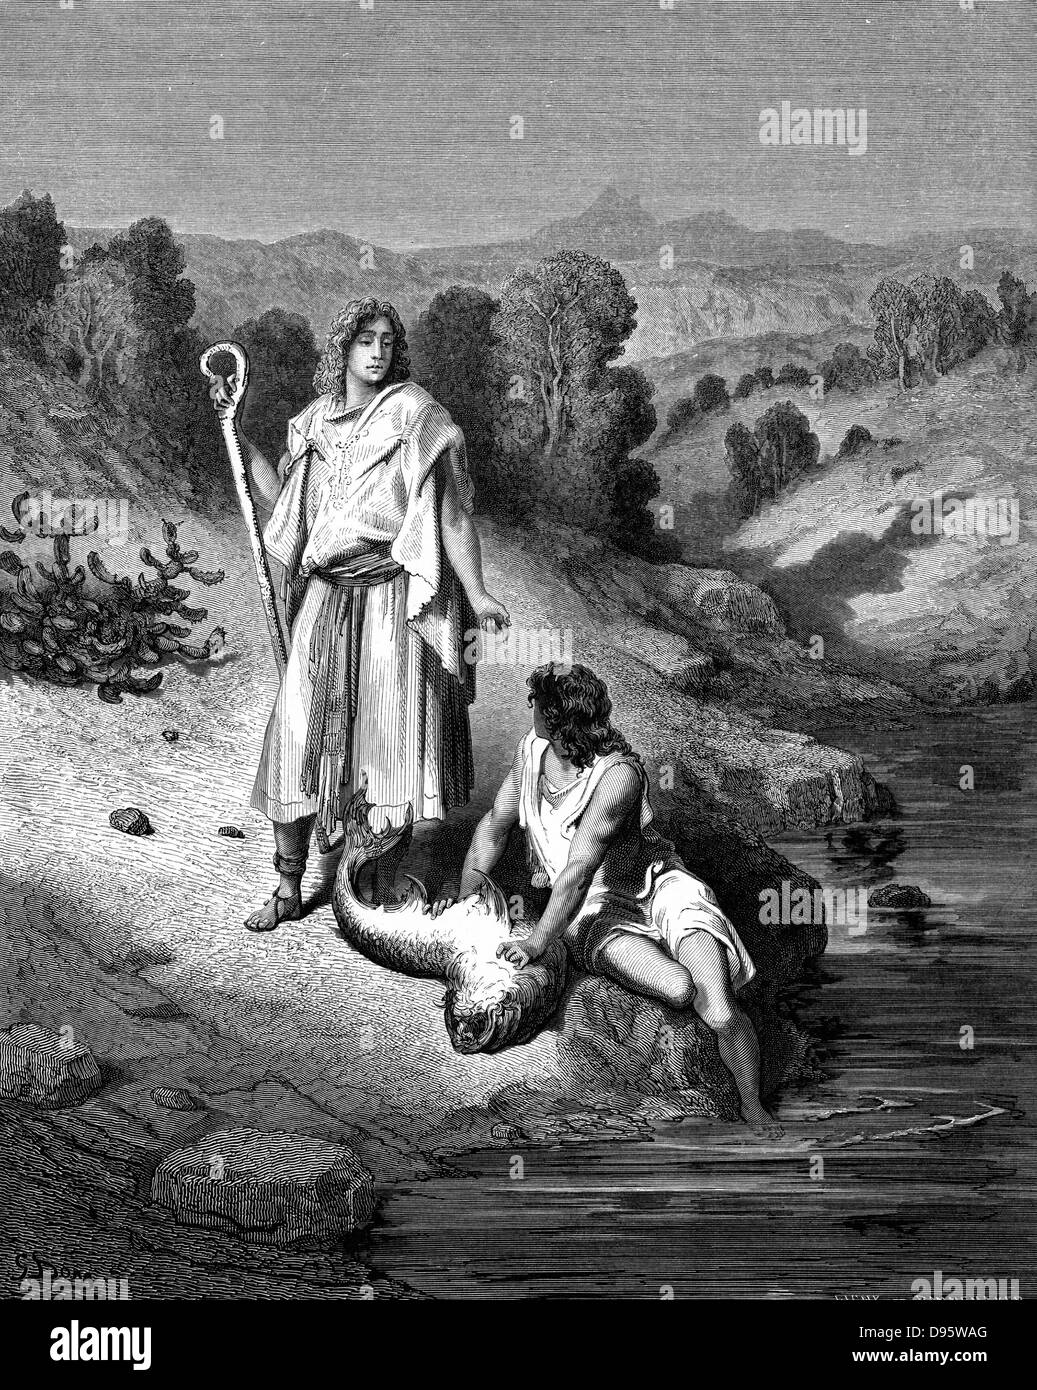 Tobias with Archangel Raphael who helped him catch fish which would miraculously cure his father's eyesight. Tobias 6.6. Plate from Gustave Dore's 'Bible' 1865-6 Wood engraving. Stock Photo